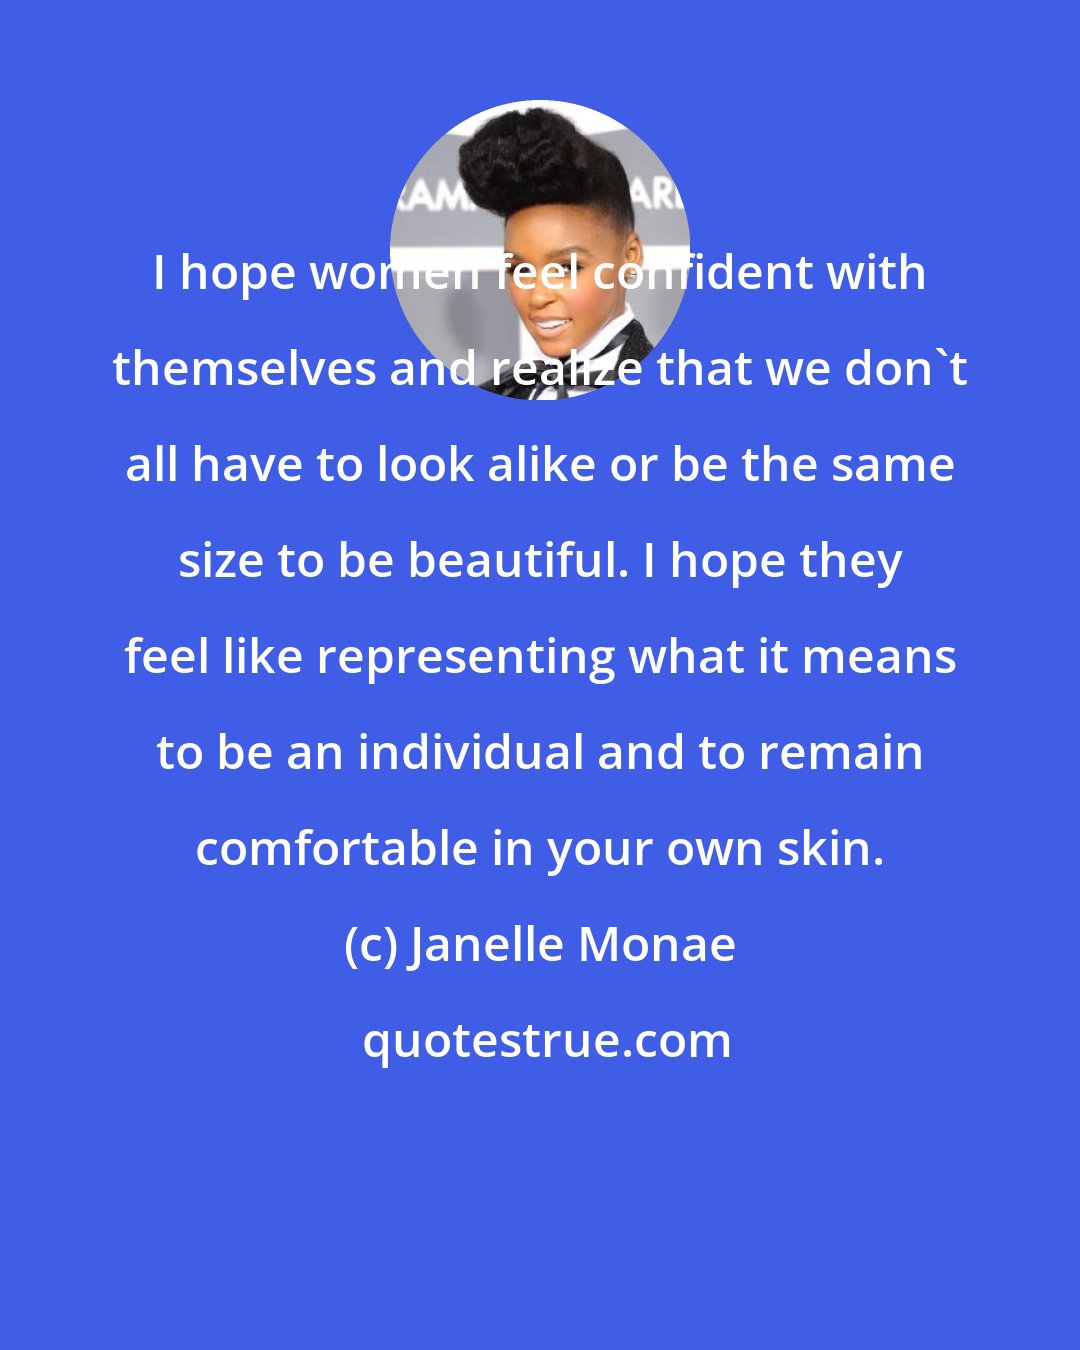 Janelle Monae: I hope women feel confident with themselves and realize that we don't all have to look alike or be the same size to be beautiful. I hope they feel like representing what it means to be an individual and to remain comfortable in your own skin.